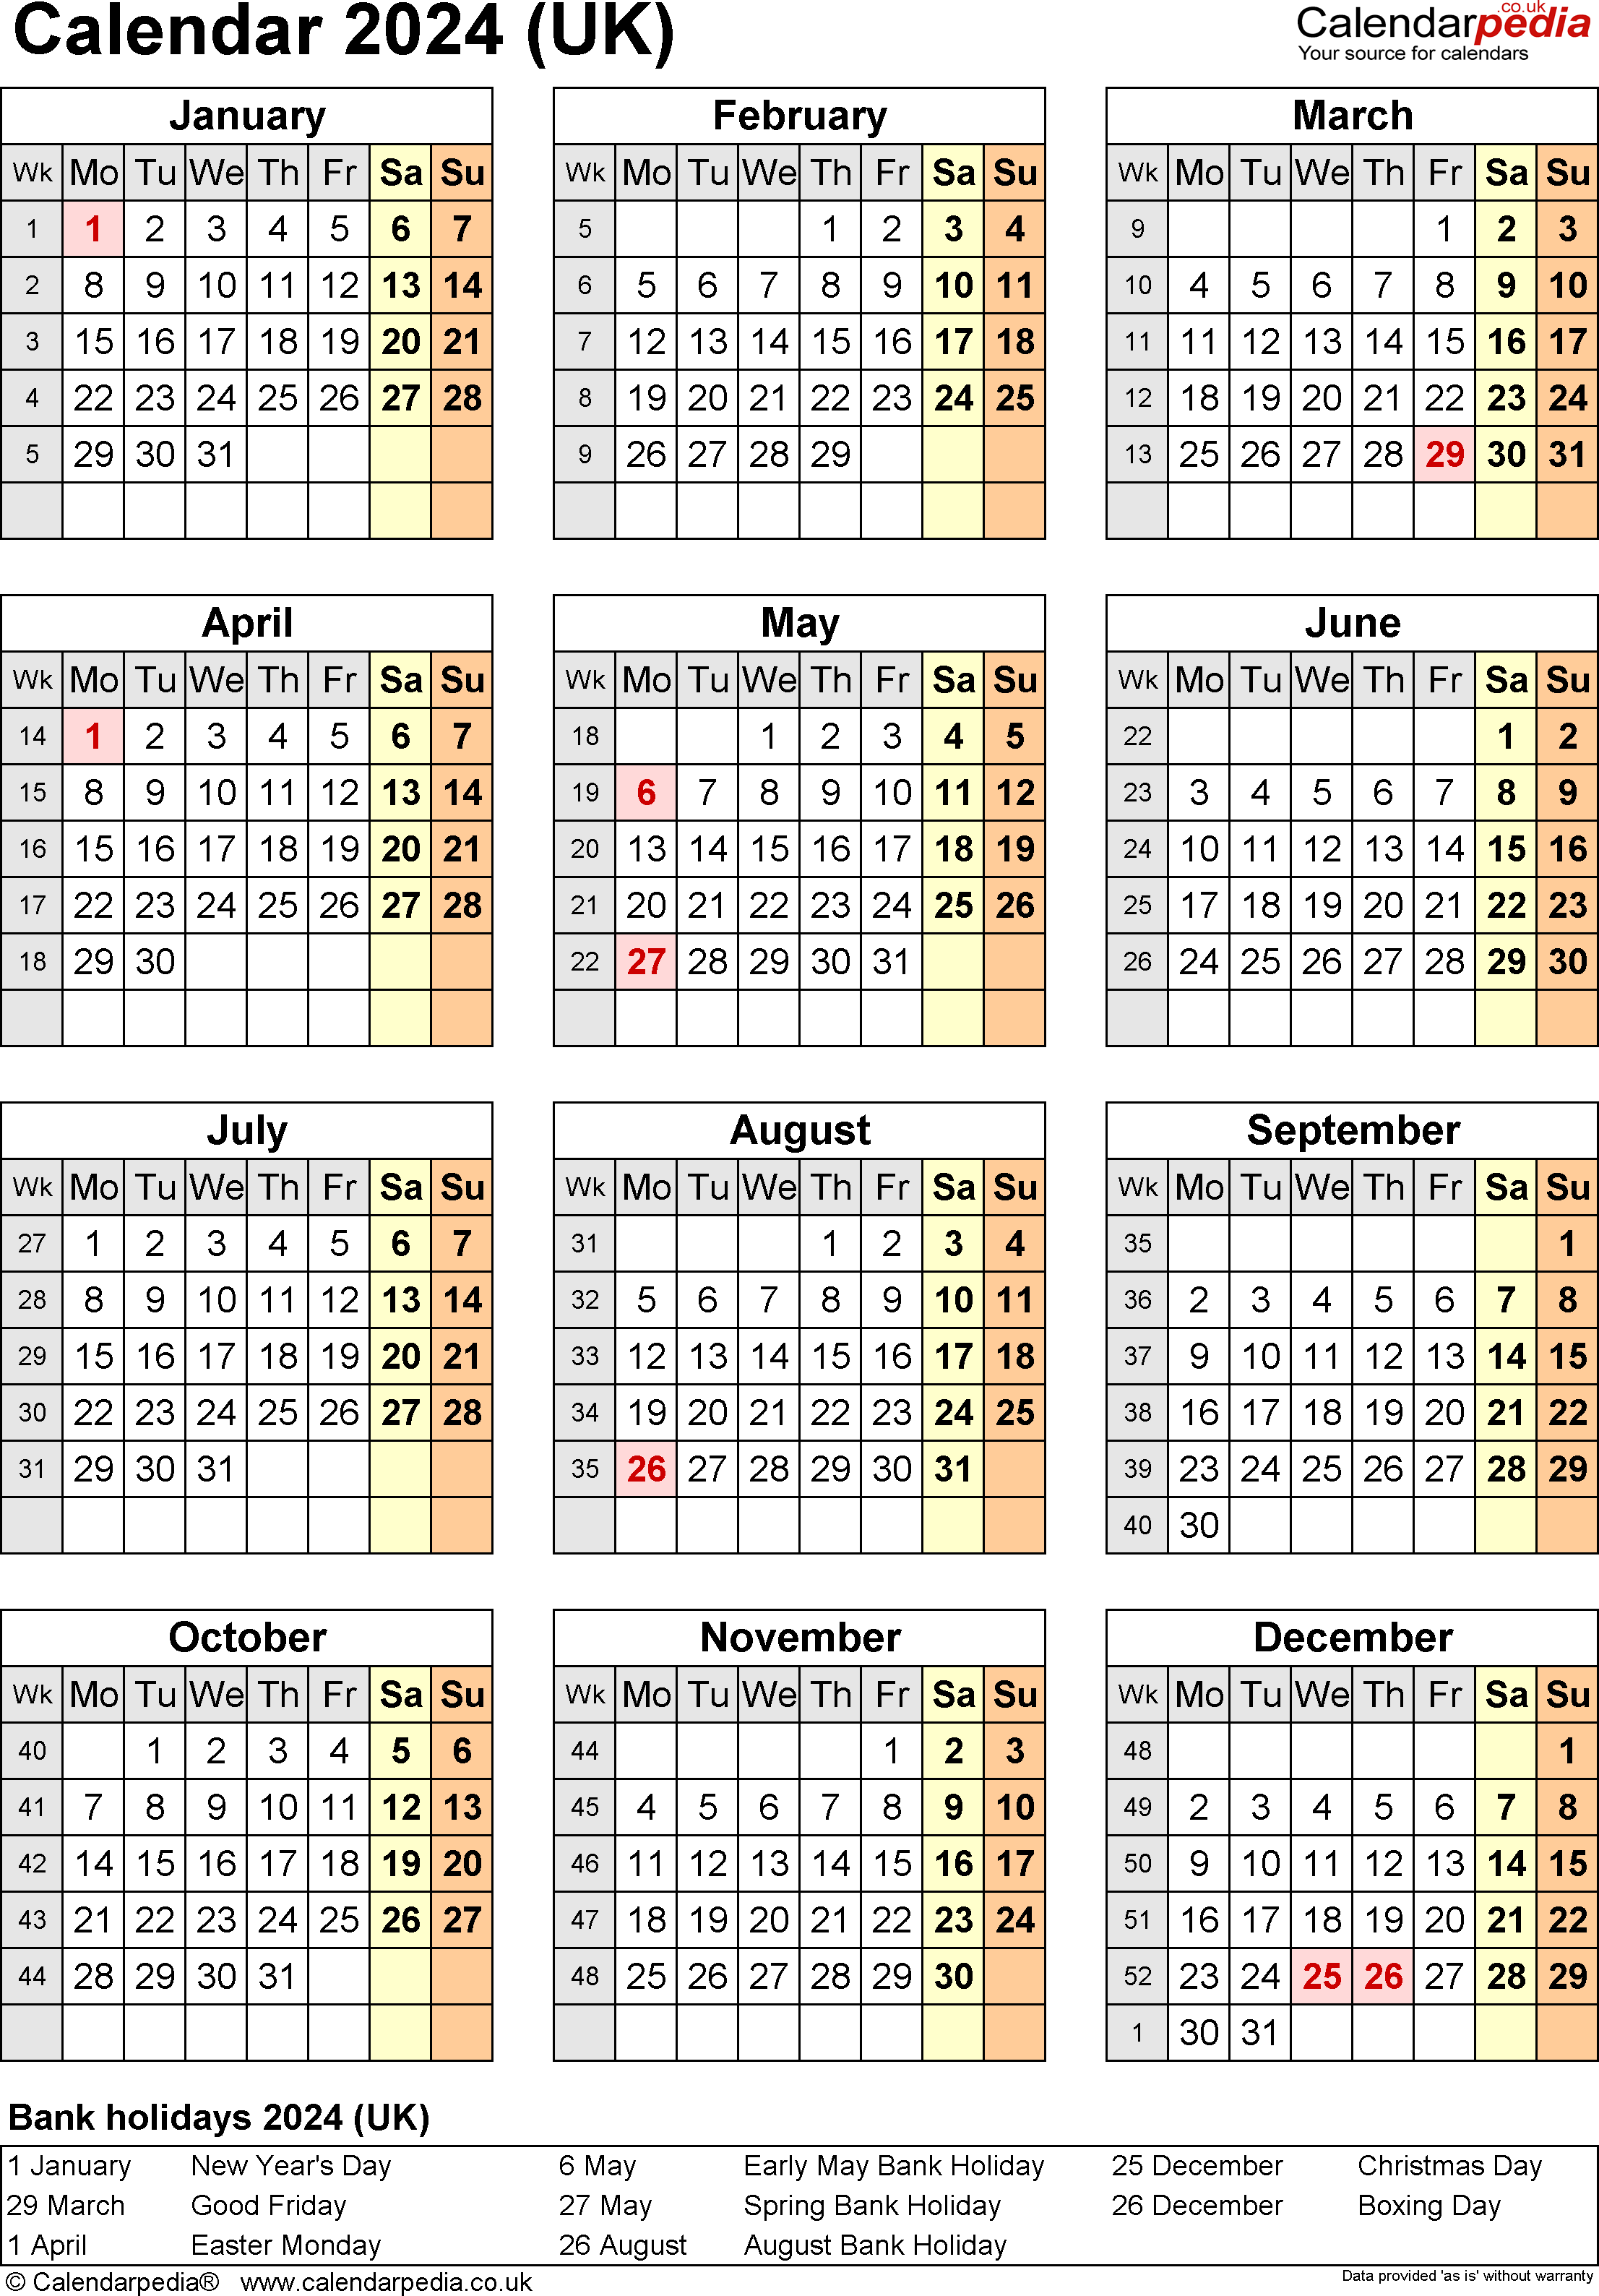 Free Printable 2024 Calendar With Holidays Large 2024 Calendar With